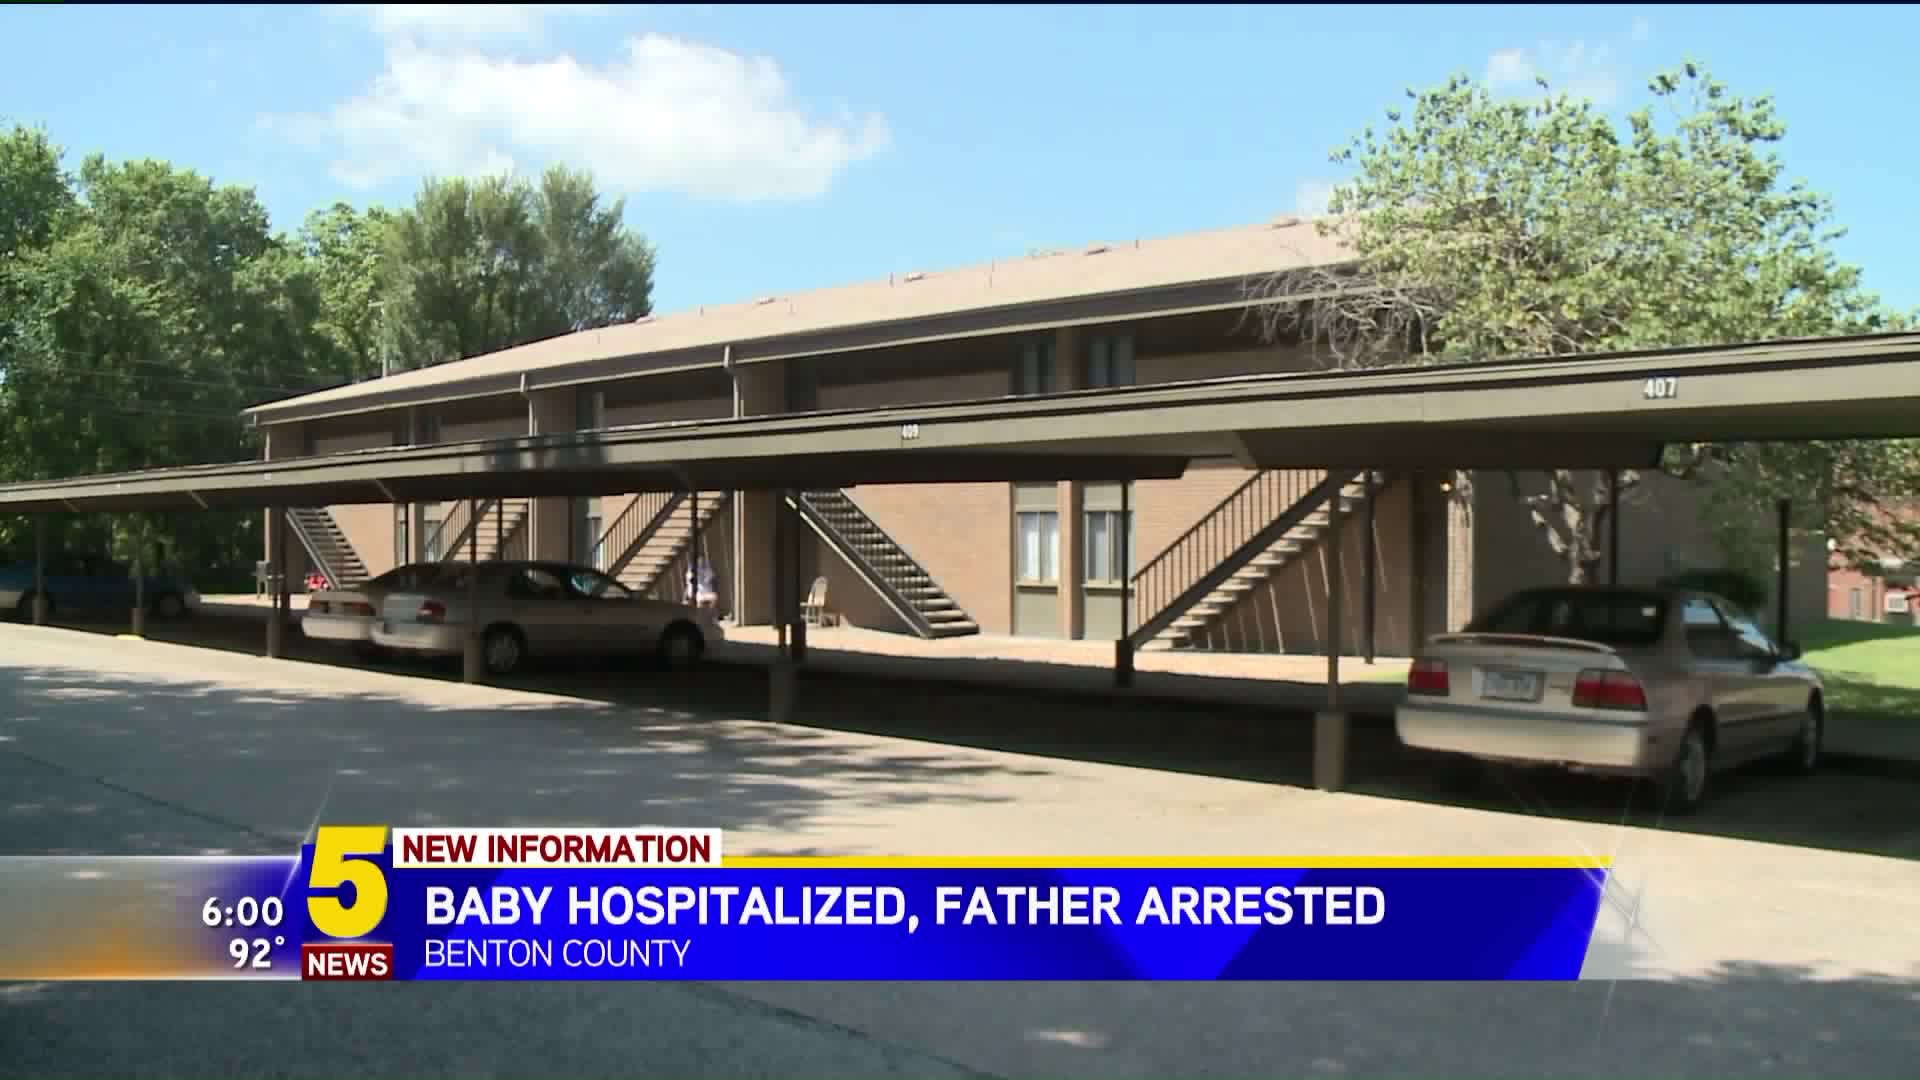 Baby Hospitalized, Father Arrested